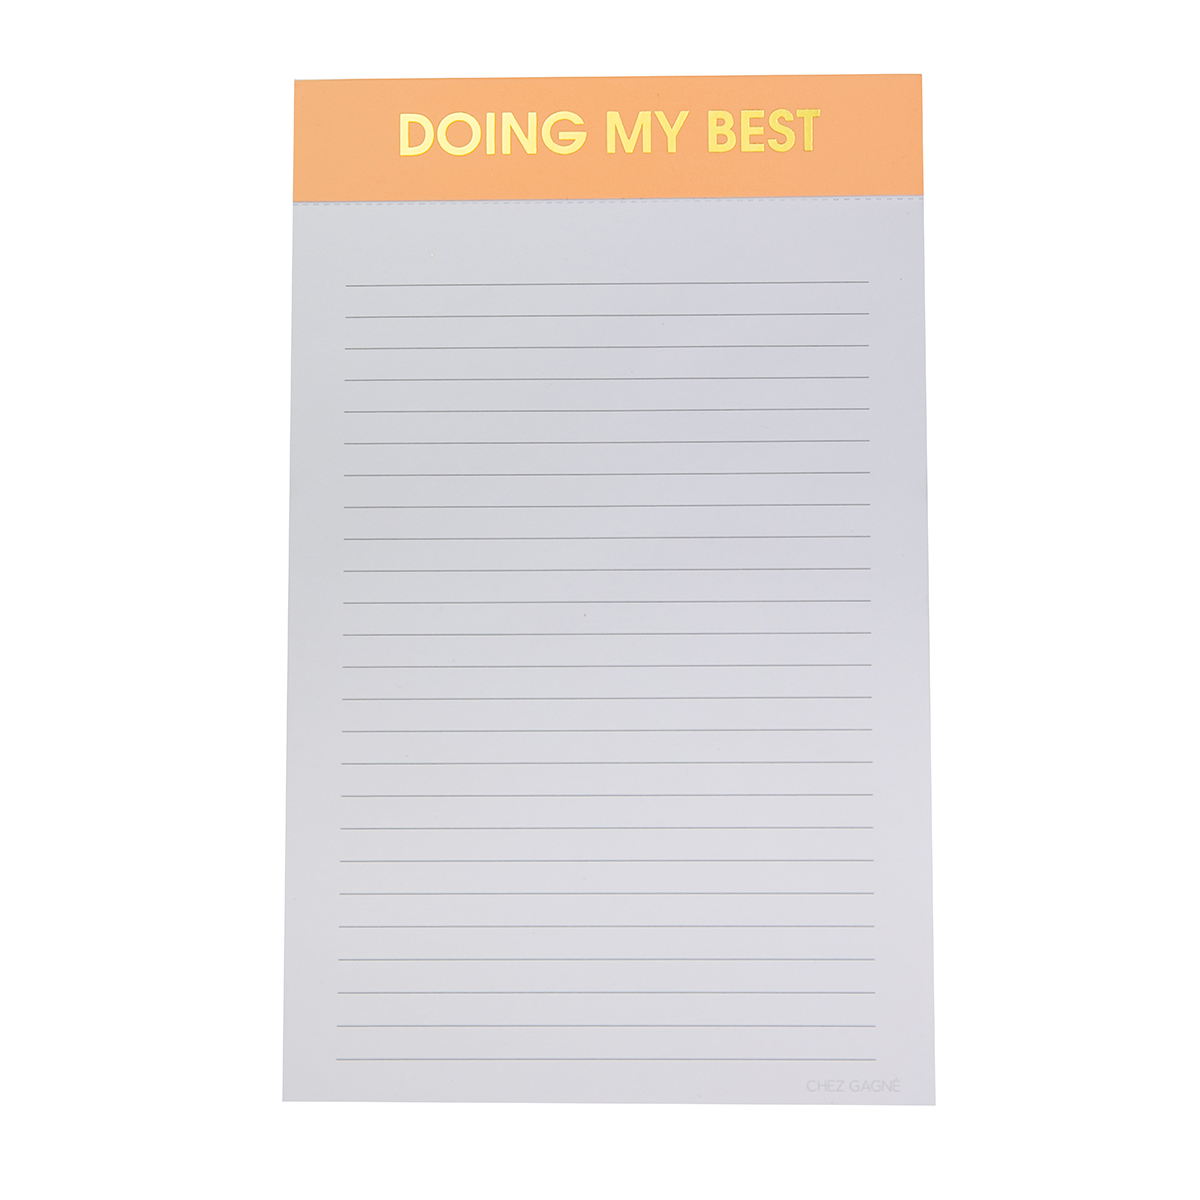 Doing My Best - Lined Notepad